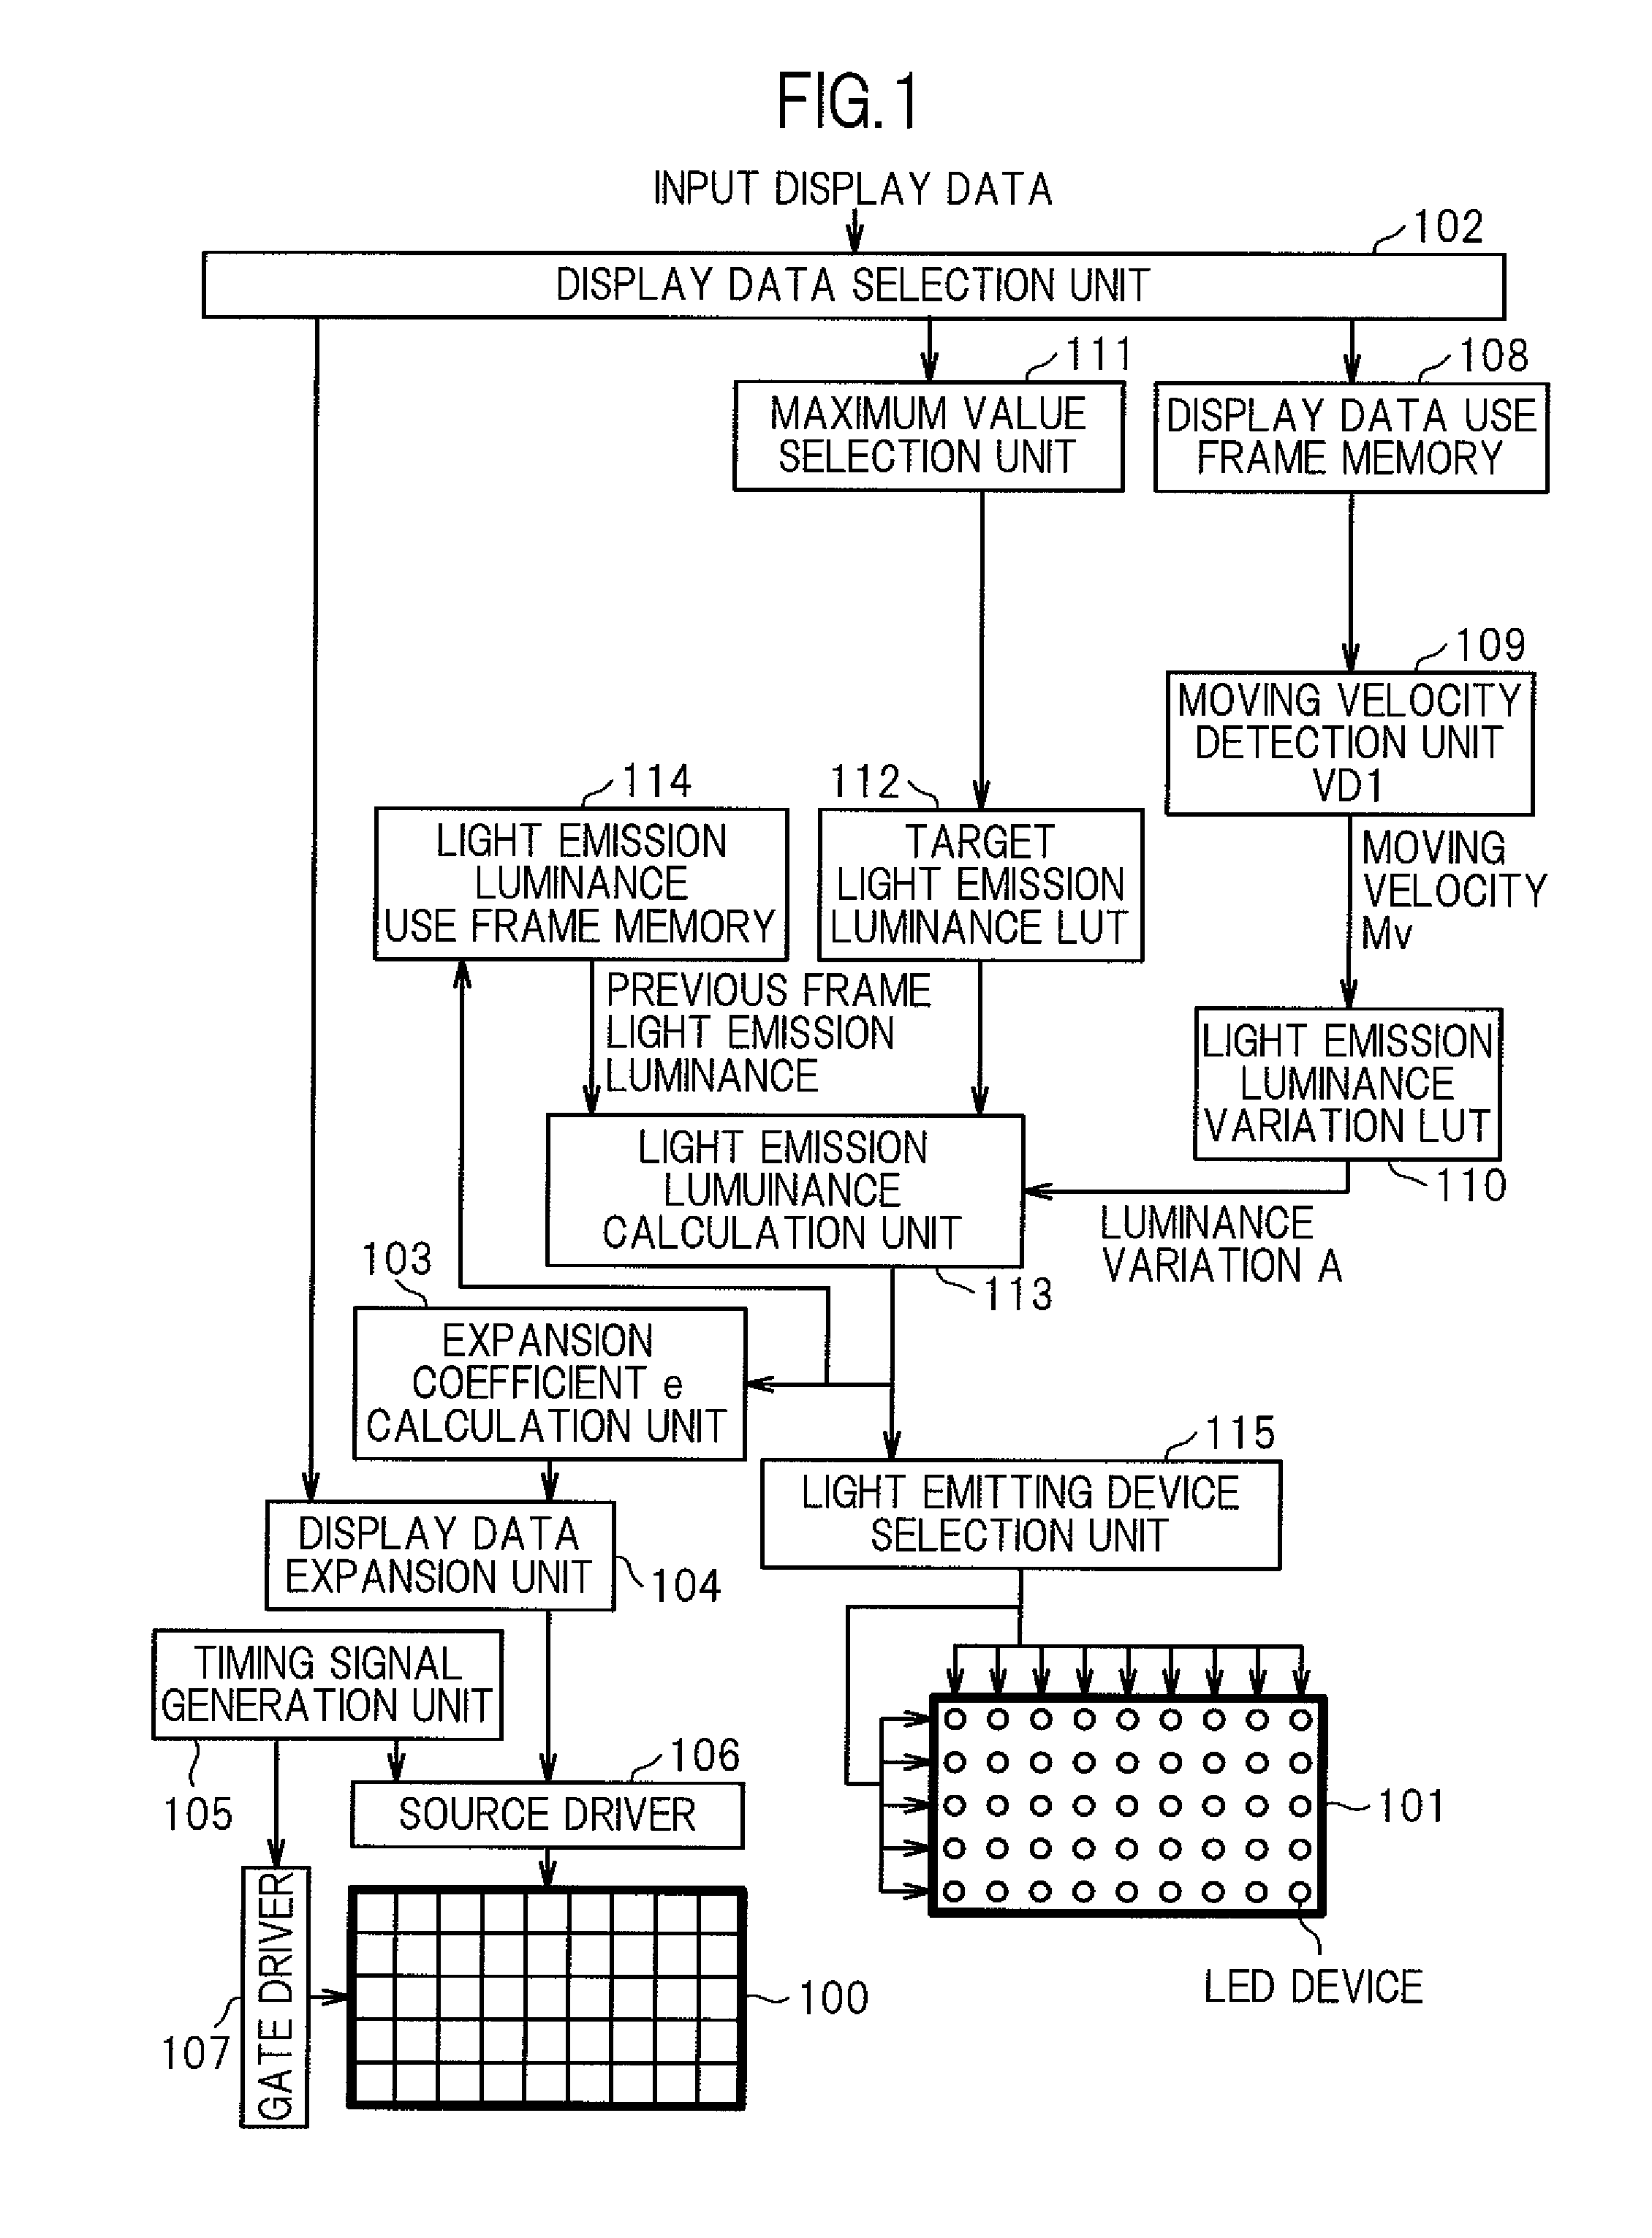 Display device with luminance variation control unit